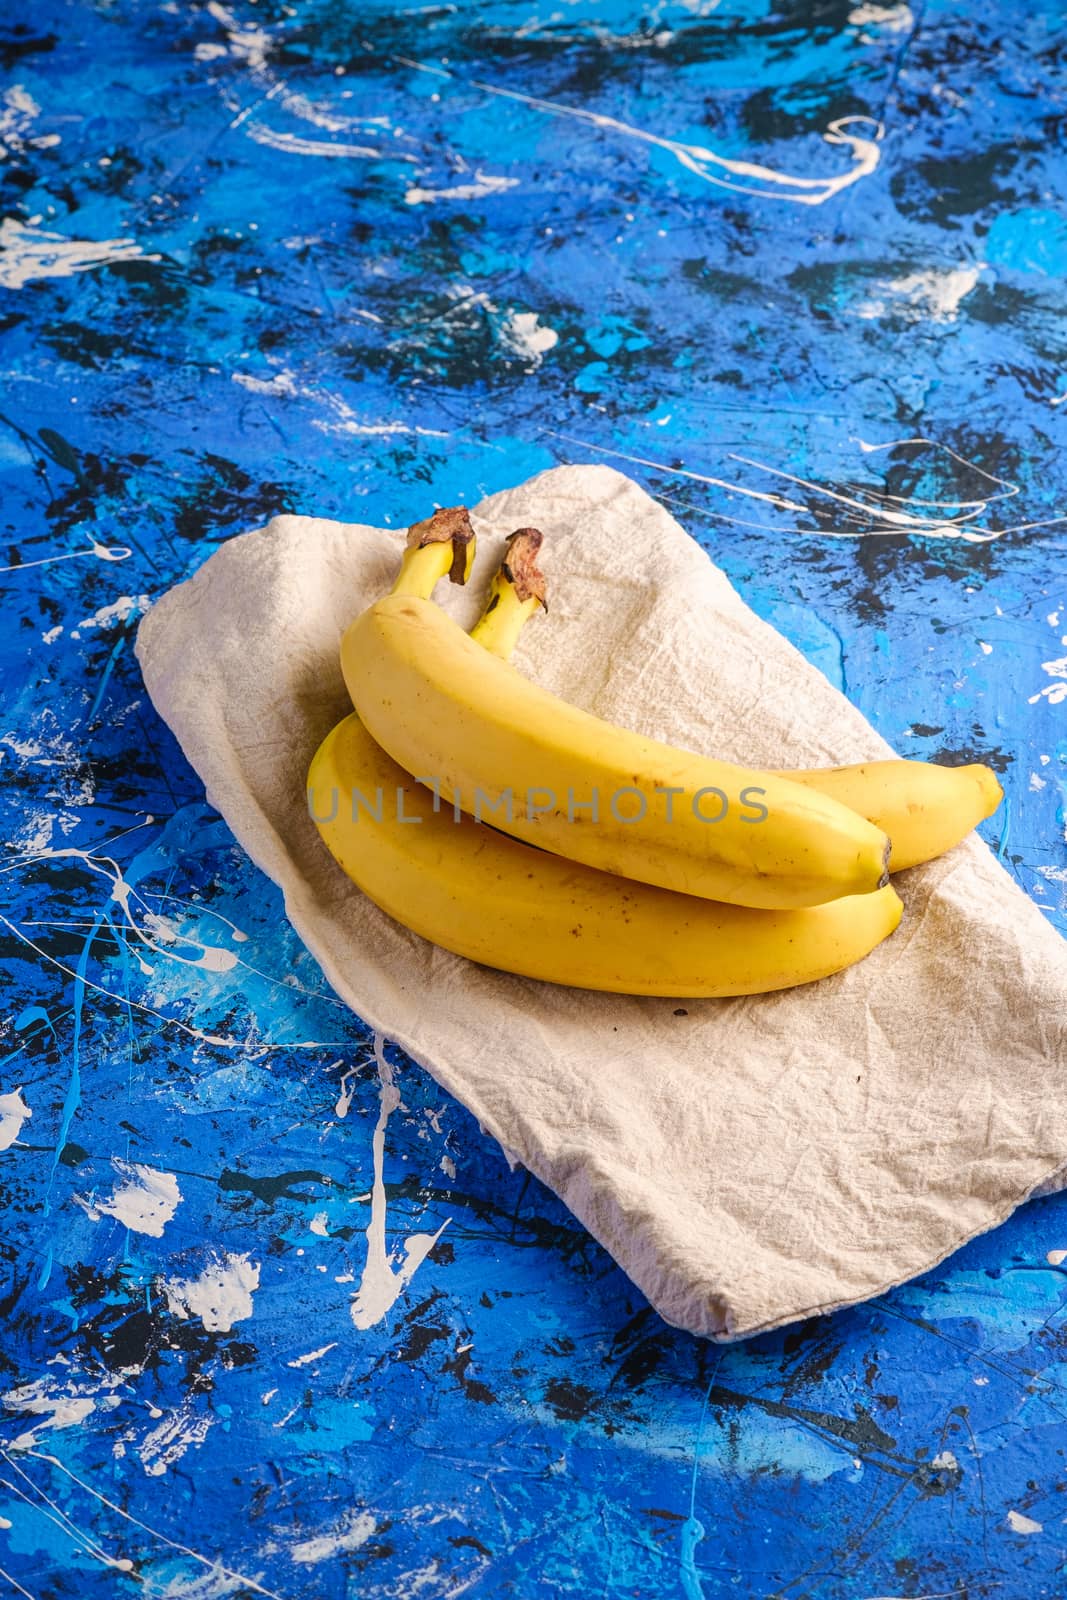 Banana fruits with tablecloth on blue textured background, angle view copy space